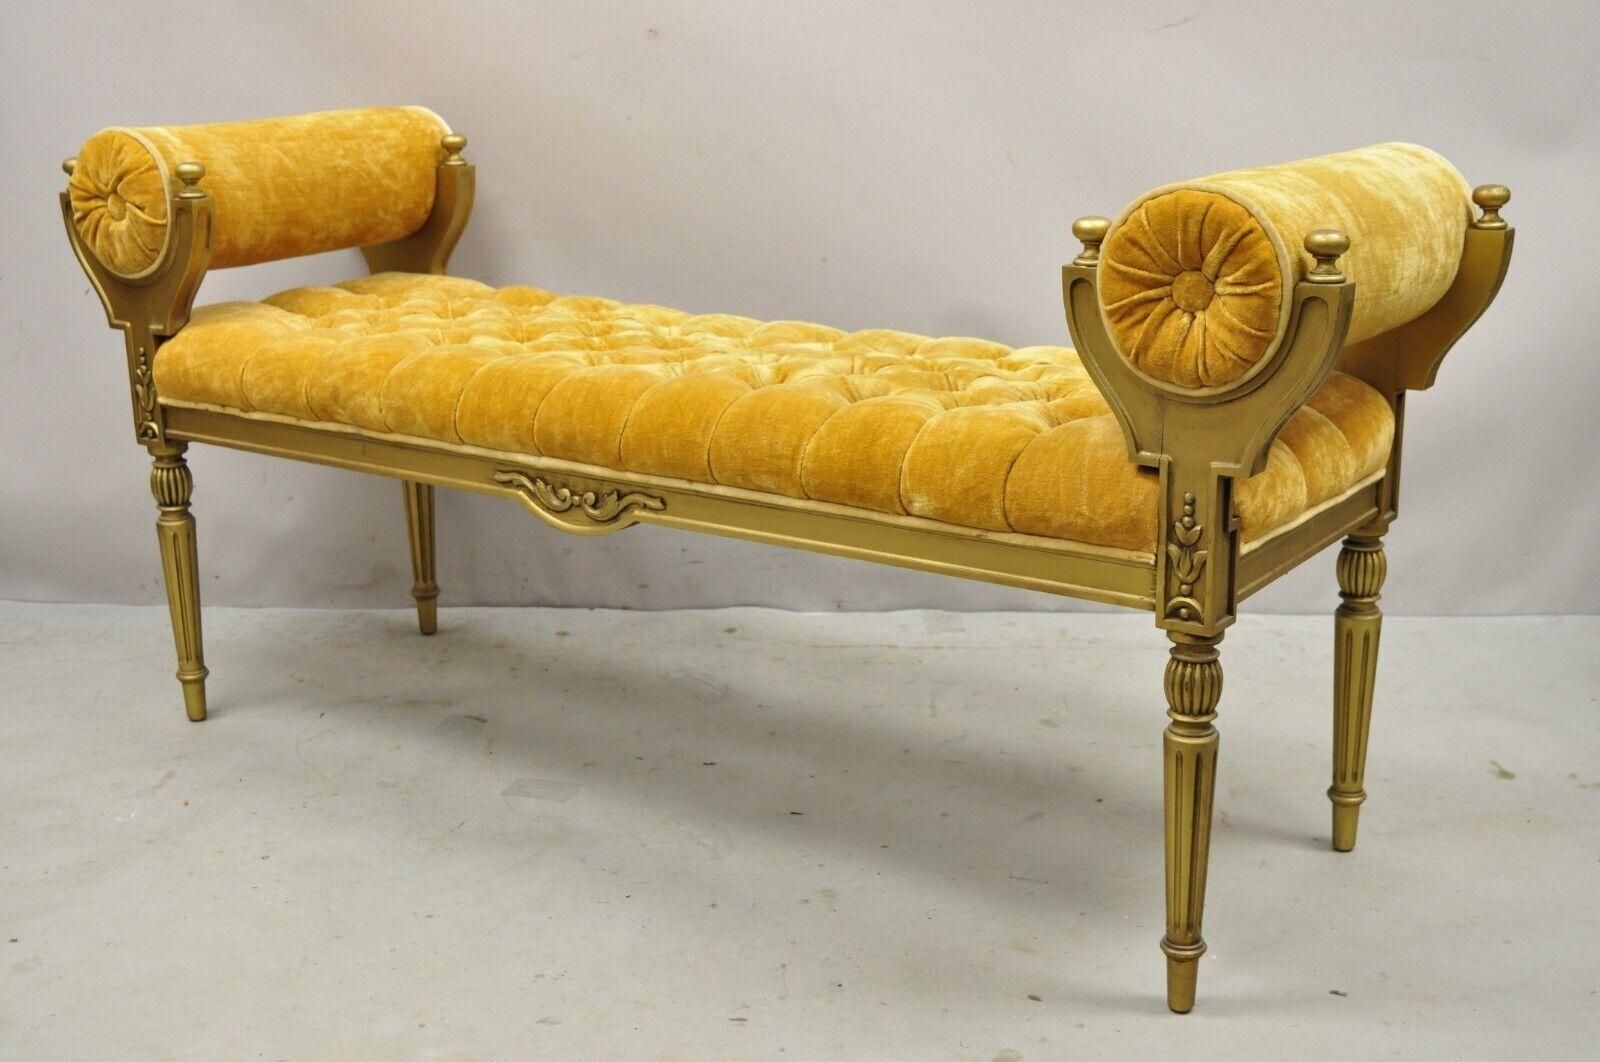 Vintage Gold Hollywood Regency French Style window bench with tufted upholstery. Item features gold vintage tufted upholstery, removable arm bolsters, solid wood frame, tapered legs, very nice vintage item, great style and form. circa Mid-20th